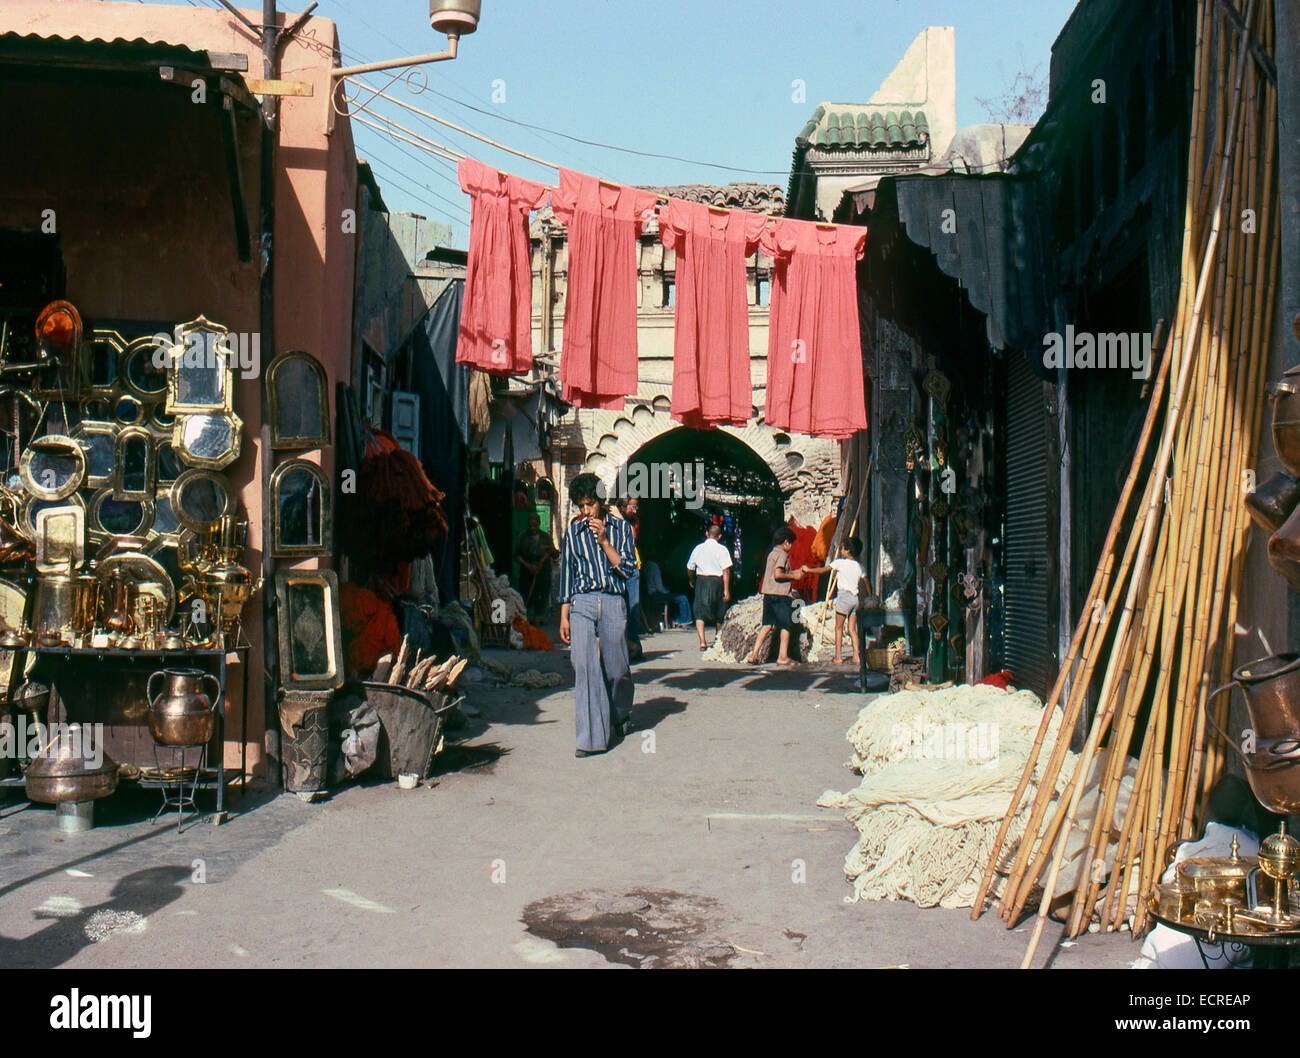 MARRAKECH, MOROCCO – AUGUST, 1979: People walking down a shopping street in the medina of a North African city on August, 1979 i Stock Photo